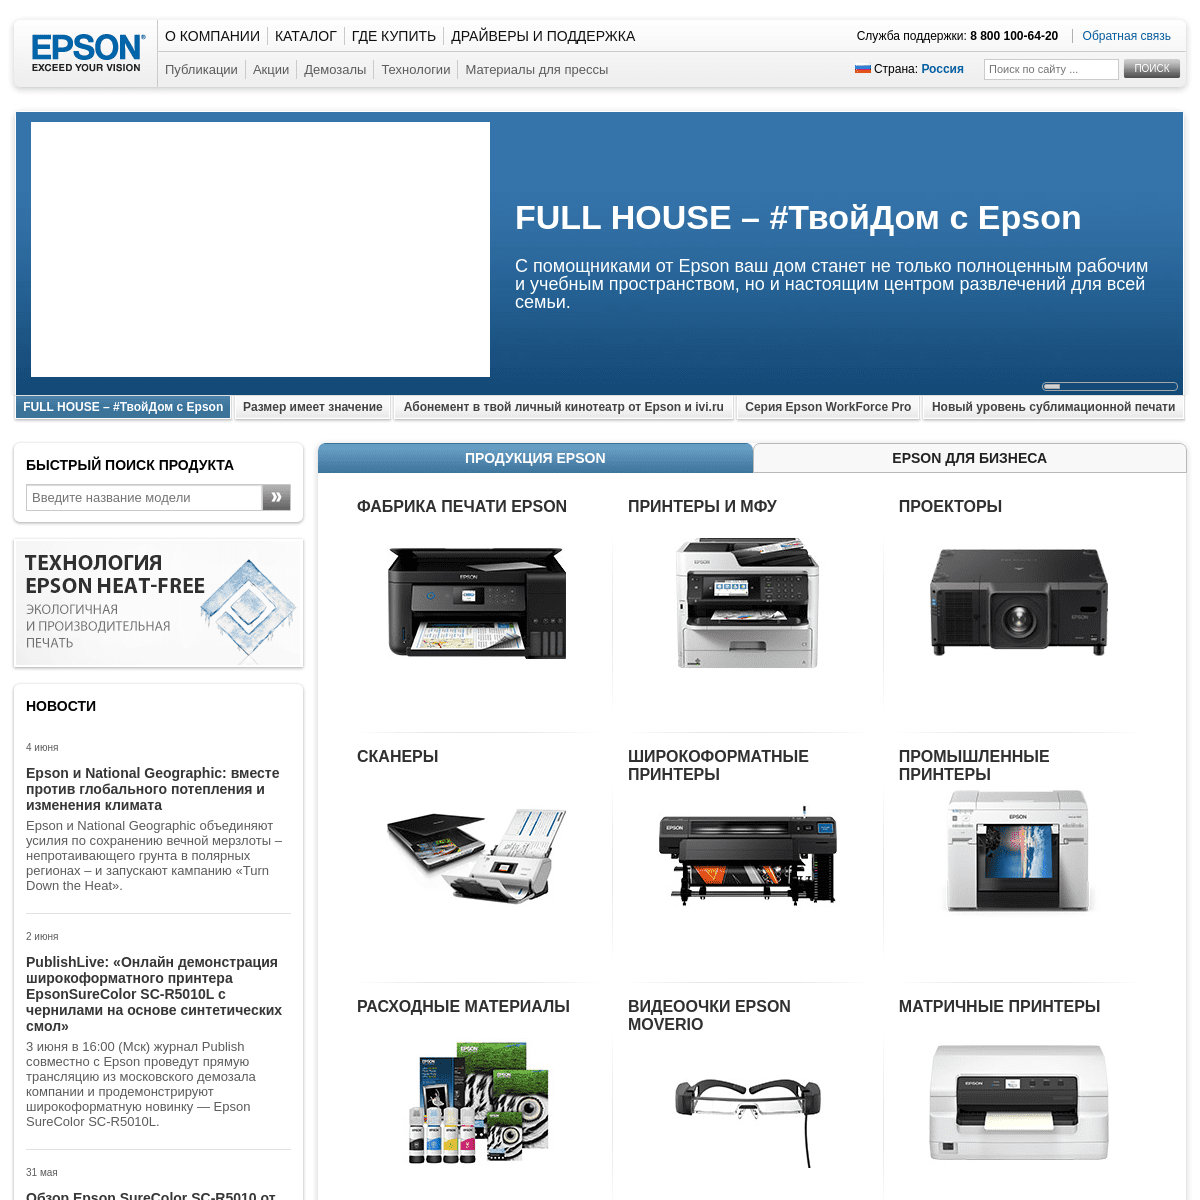 A complete backup of https://epson.ru